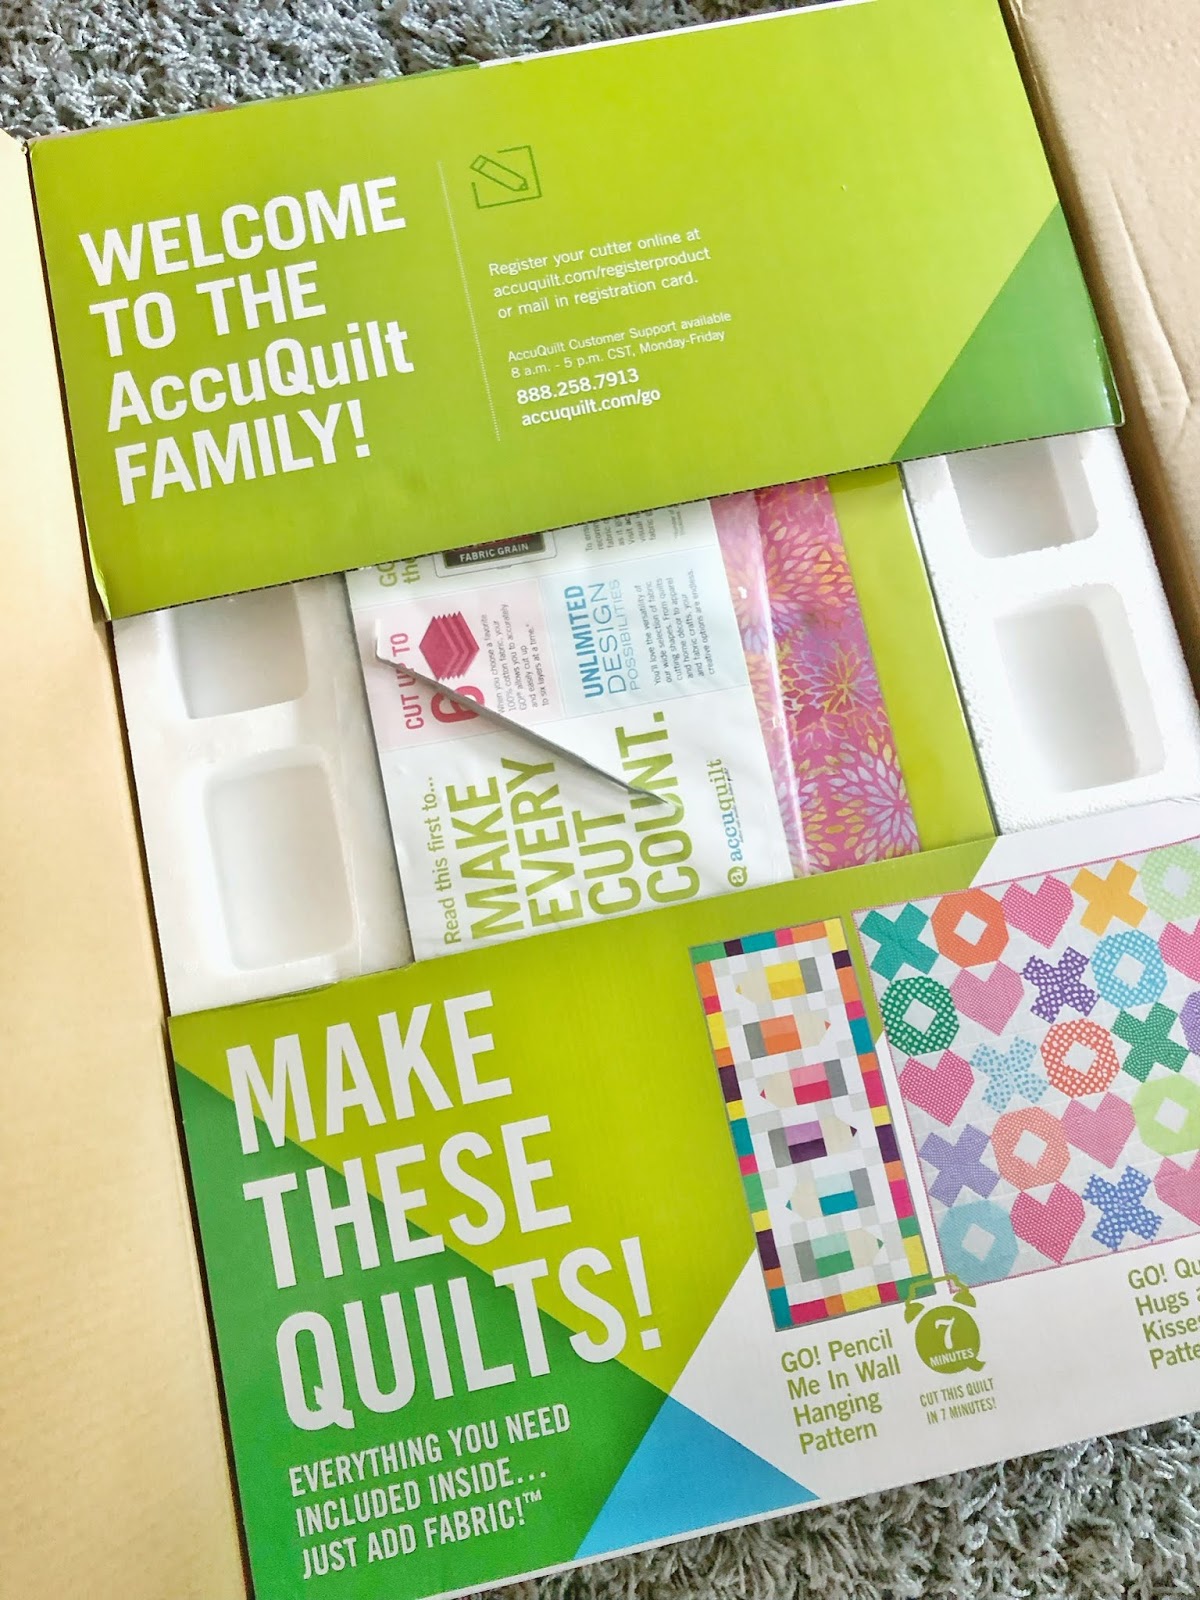 AccuQuilt  Ready. Set. GO! Ultimate Fabric Cutting System